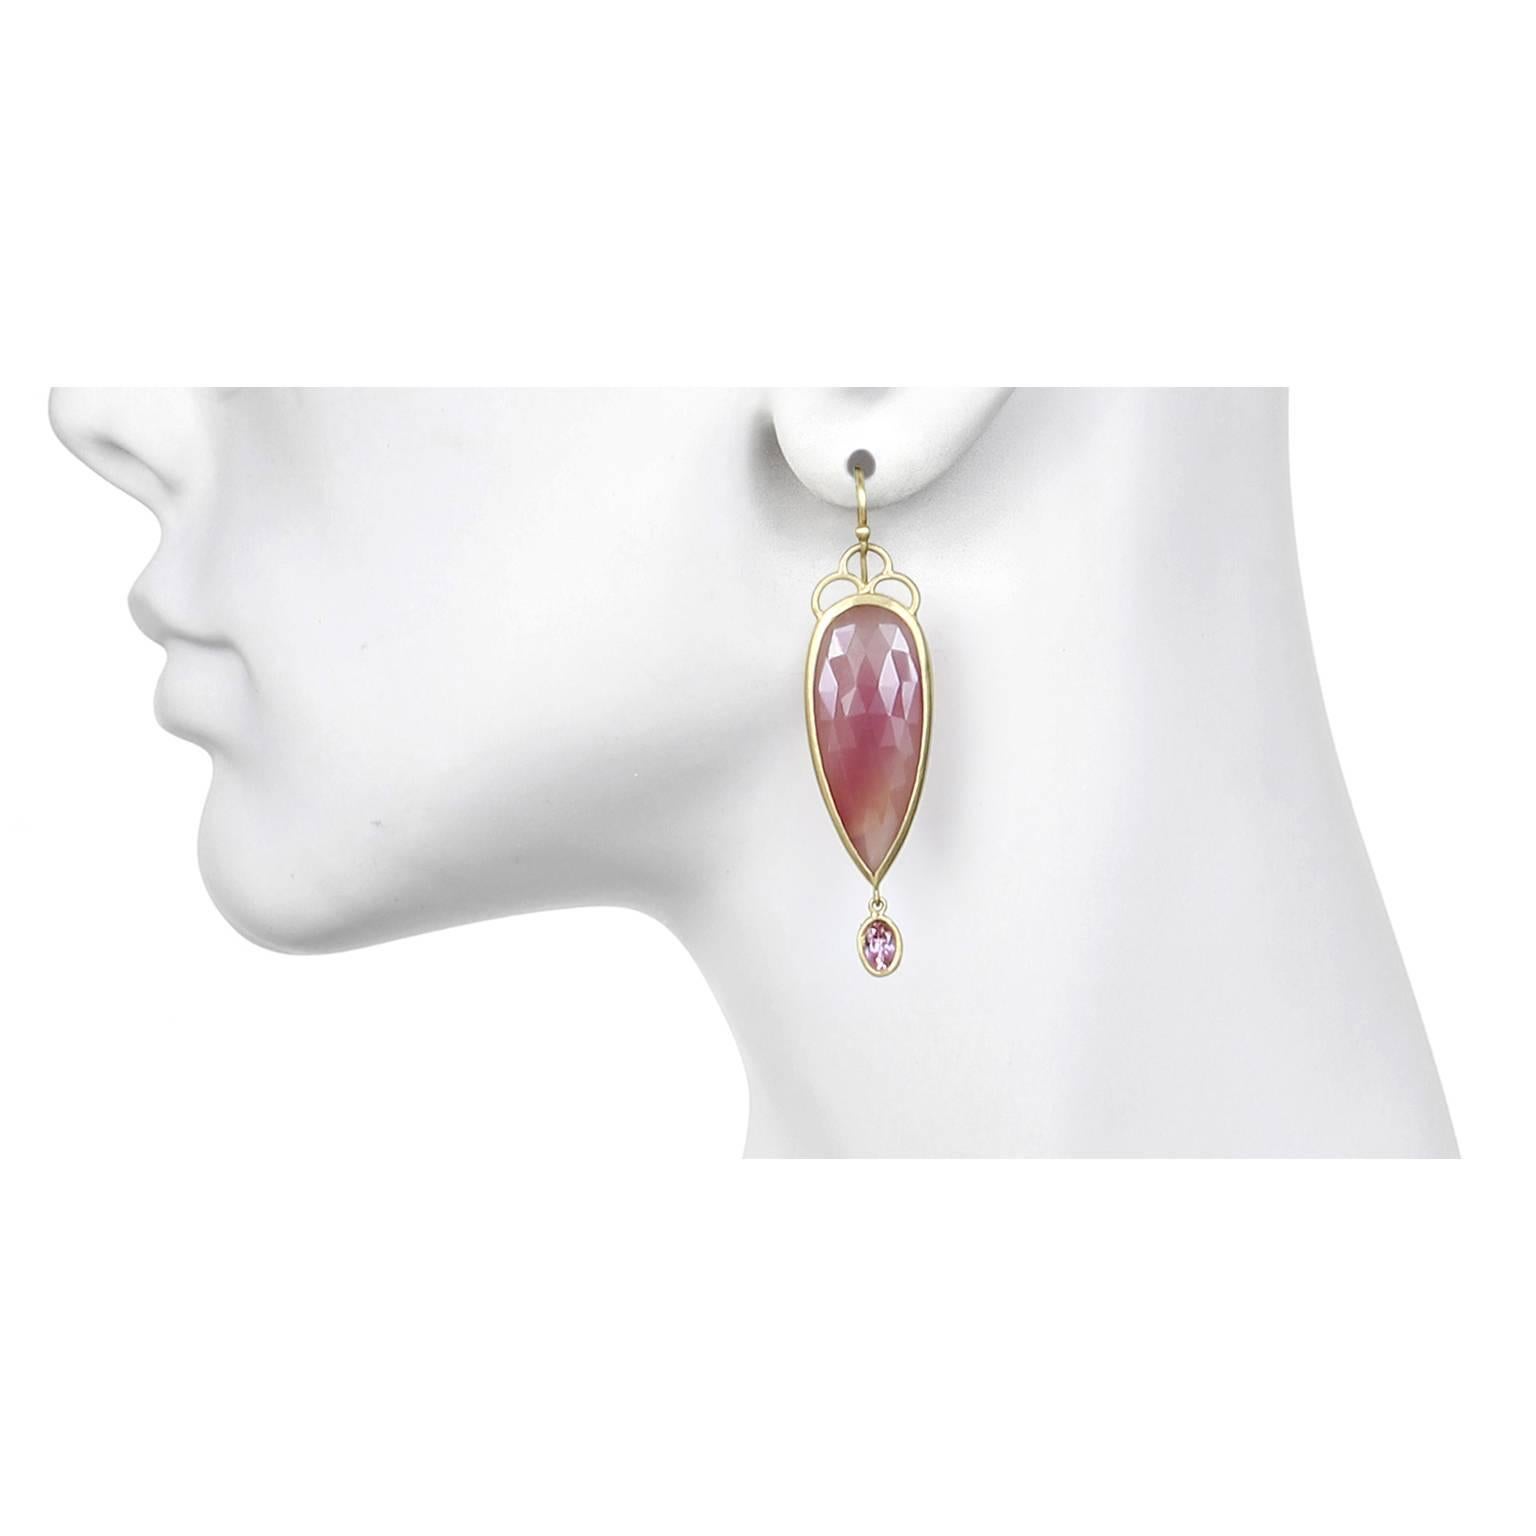 One-of-a-kind, handmade pink sapphire earrings in 18k gold.  The soft color and the long and lean shape of the tear drop Sapphires make up these earrings that are truly unique. Scallop detail and movement of the faceted oval Imperial Topaz drops add